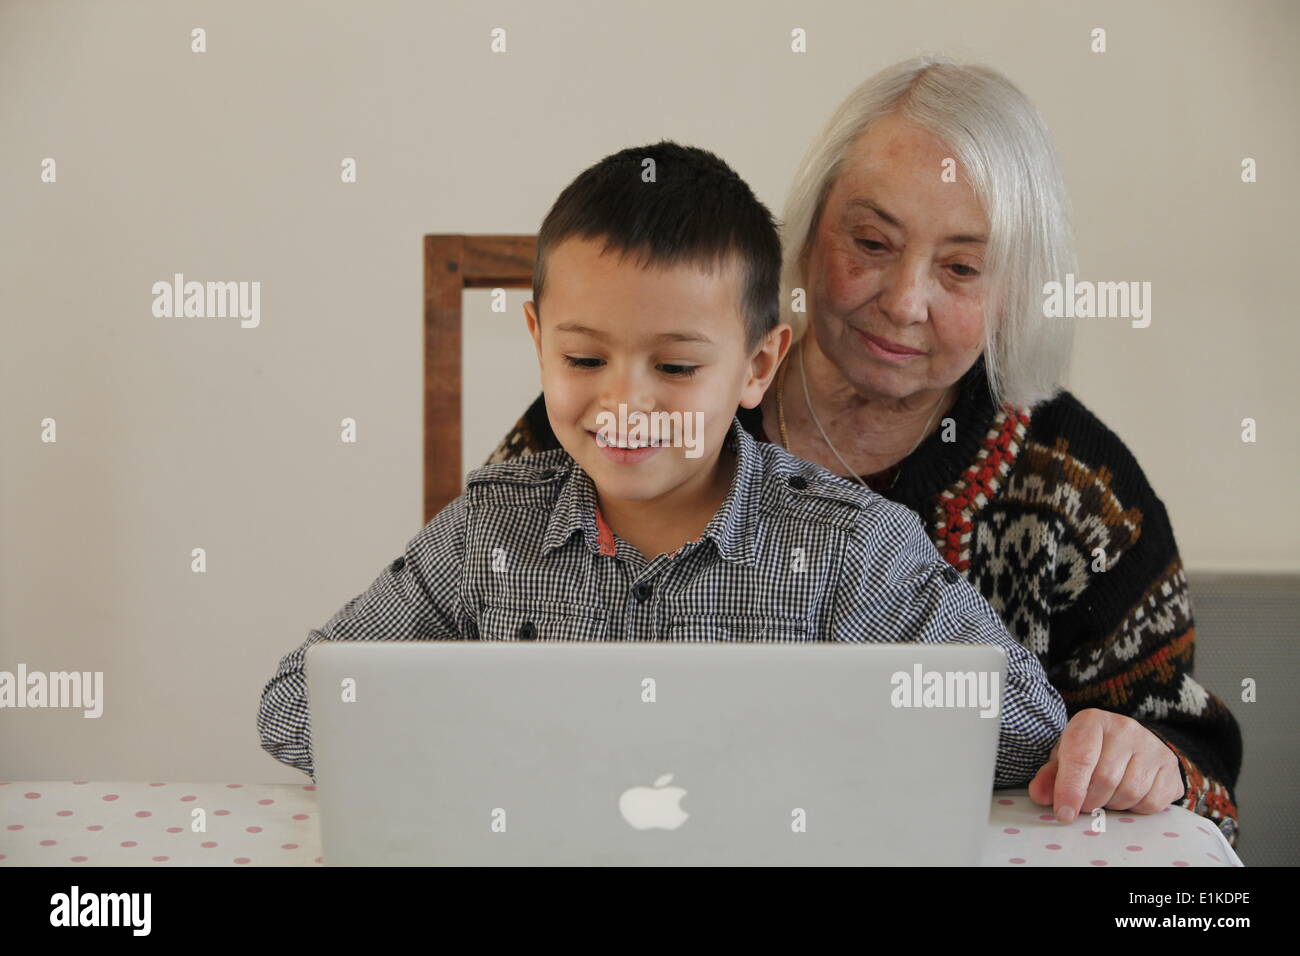 6-year-old boy looking at a laptop with his grandmother Stock Photo